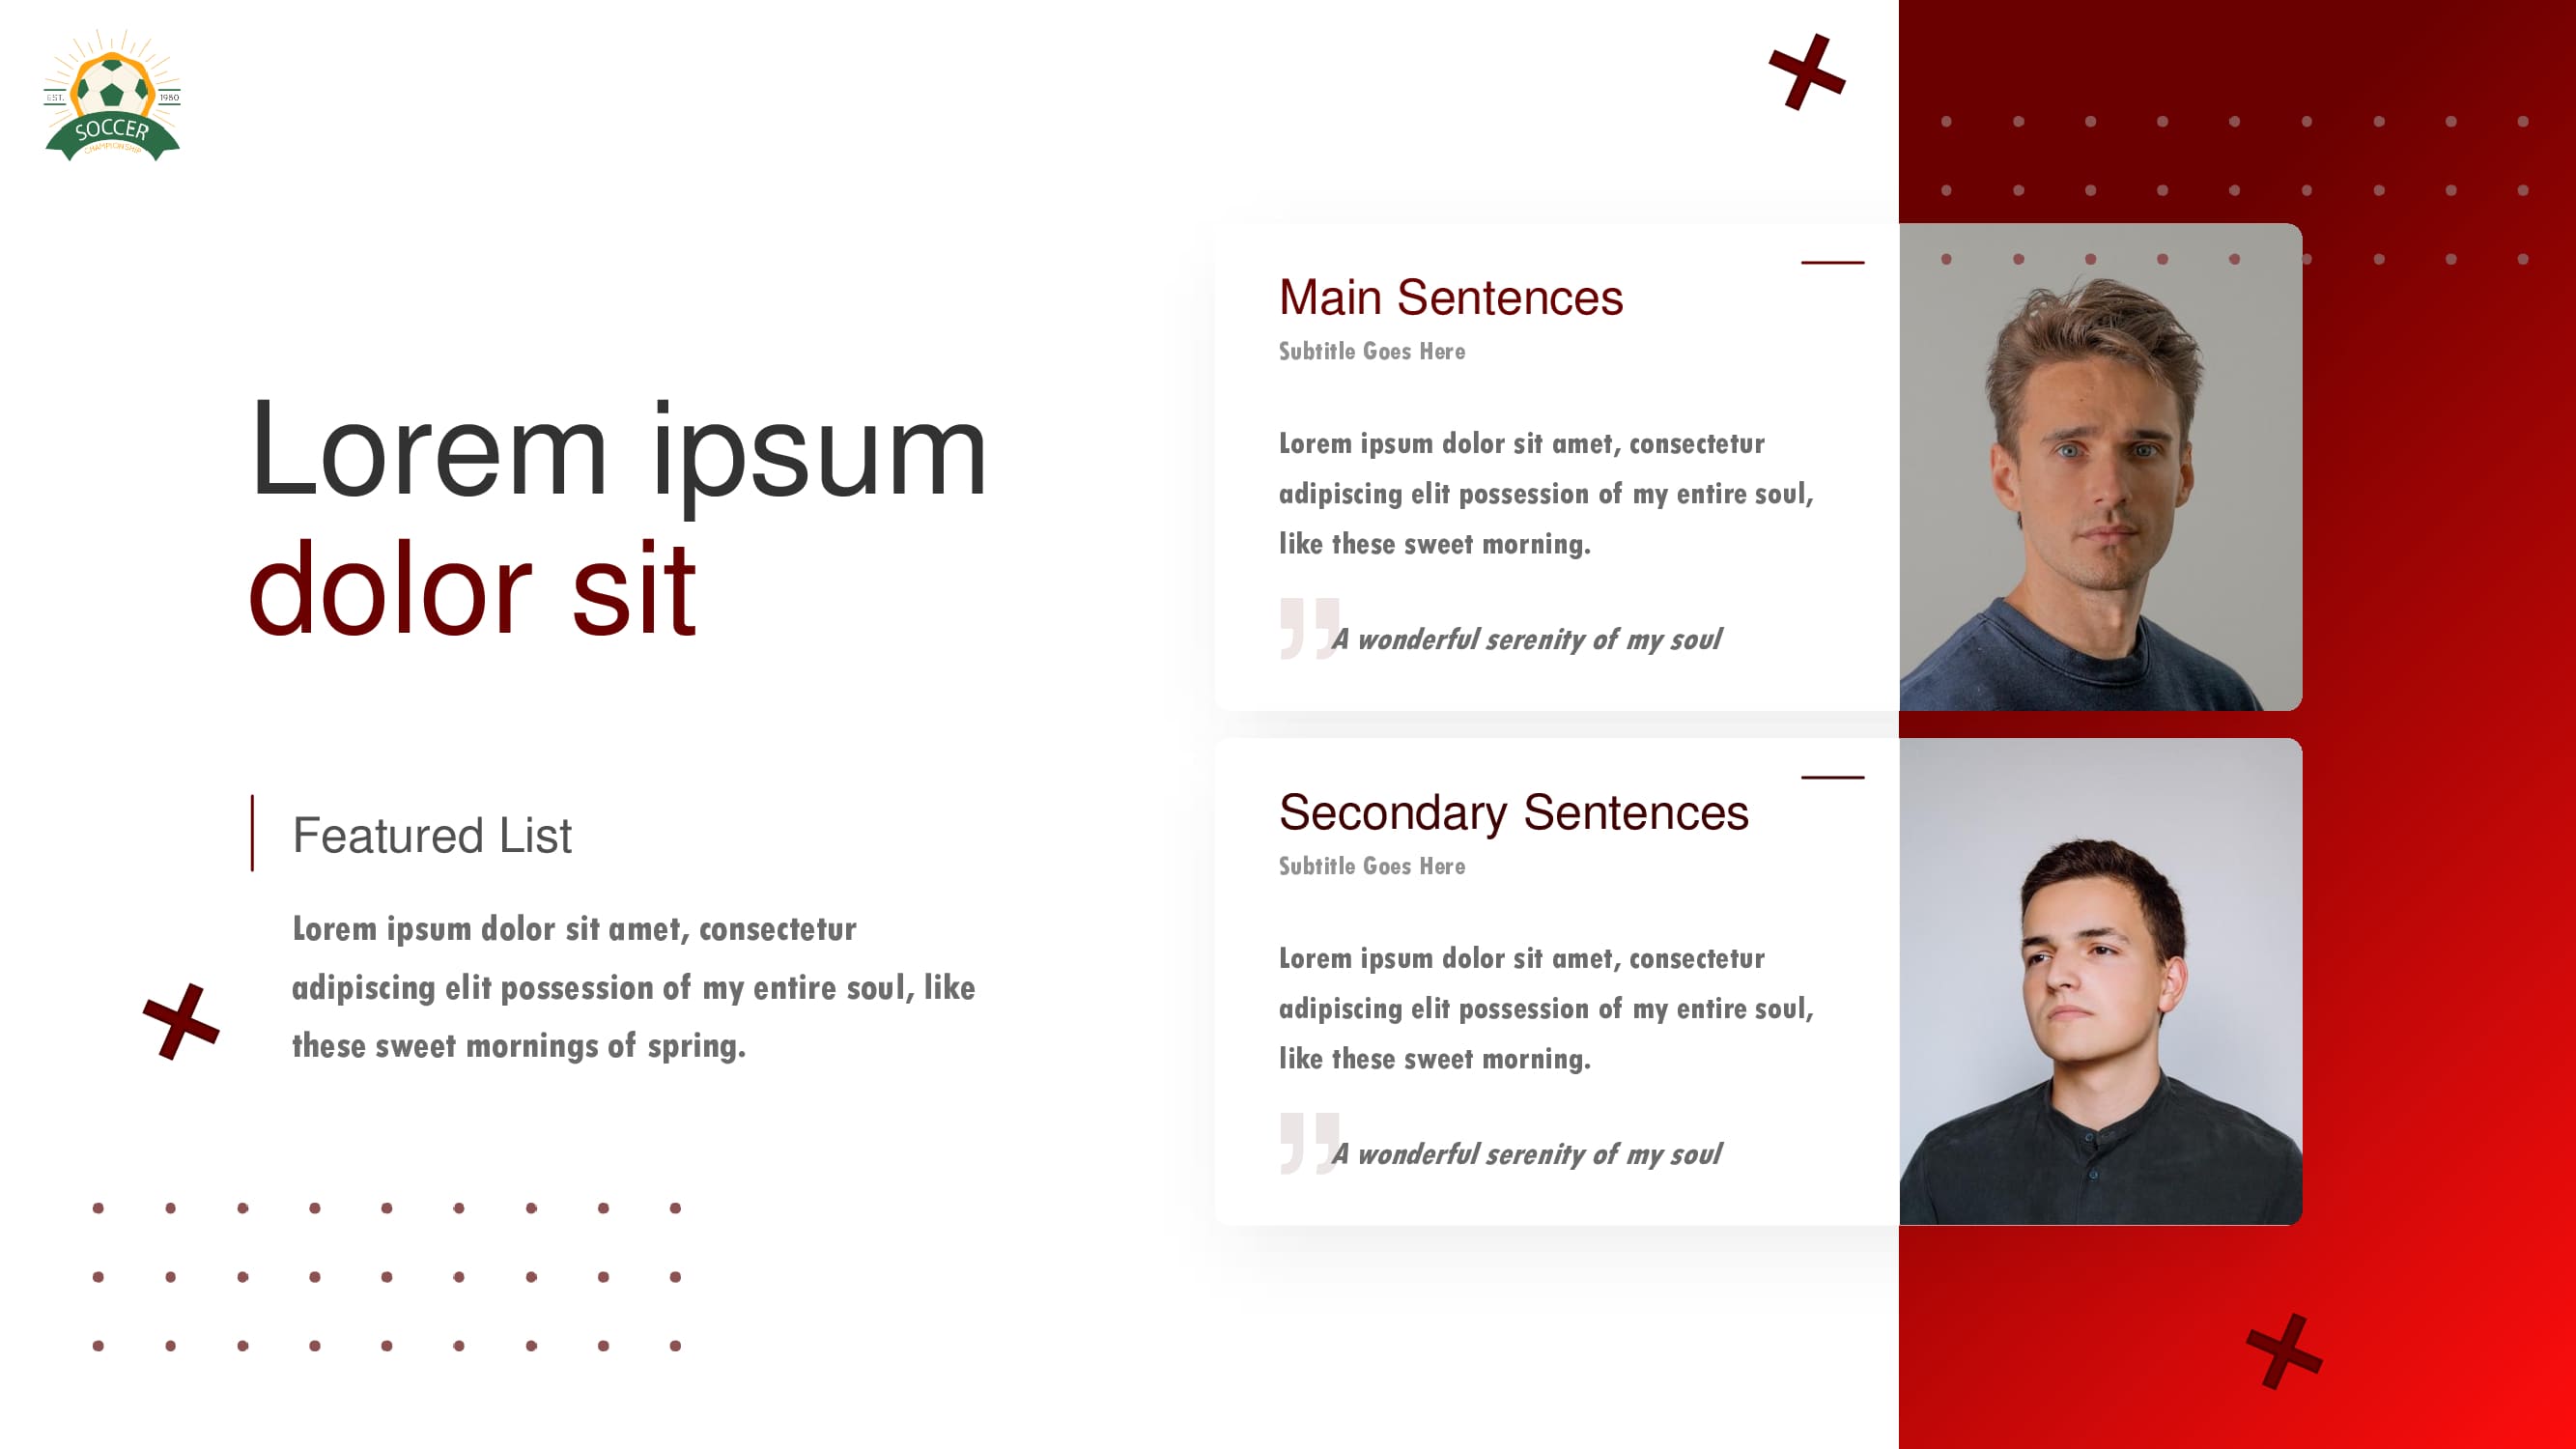 A nice slide for a featured list with main and secondary sentences and 2 portraits of men.